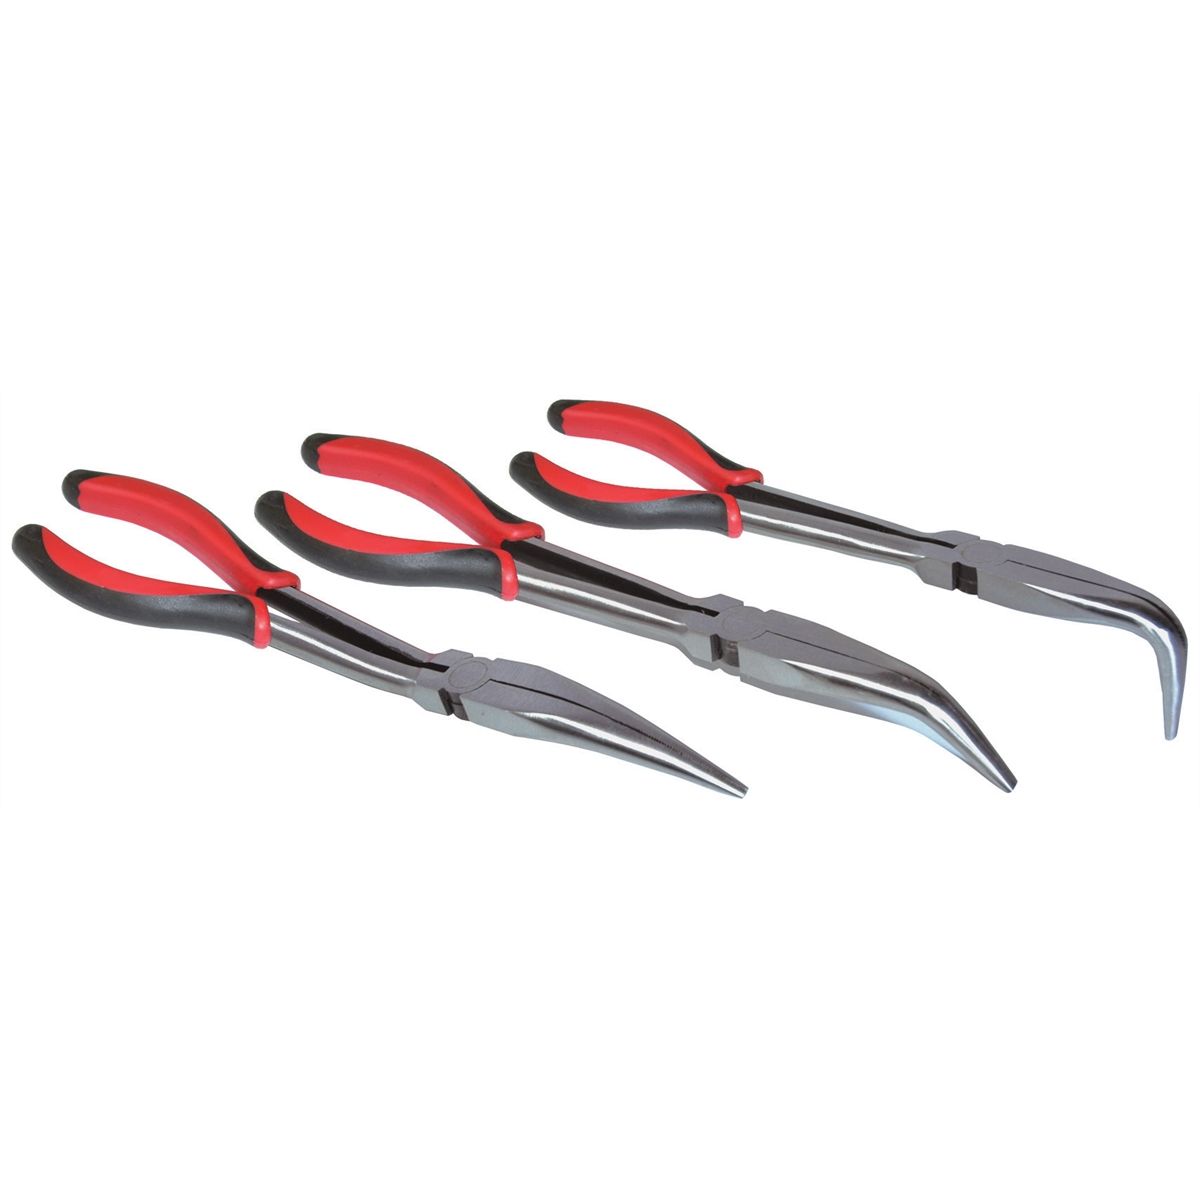 NEEDLE NOSE PLIERS 11 INCH- 3PC